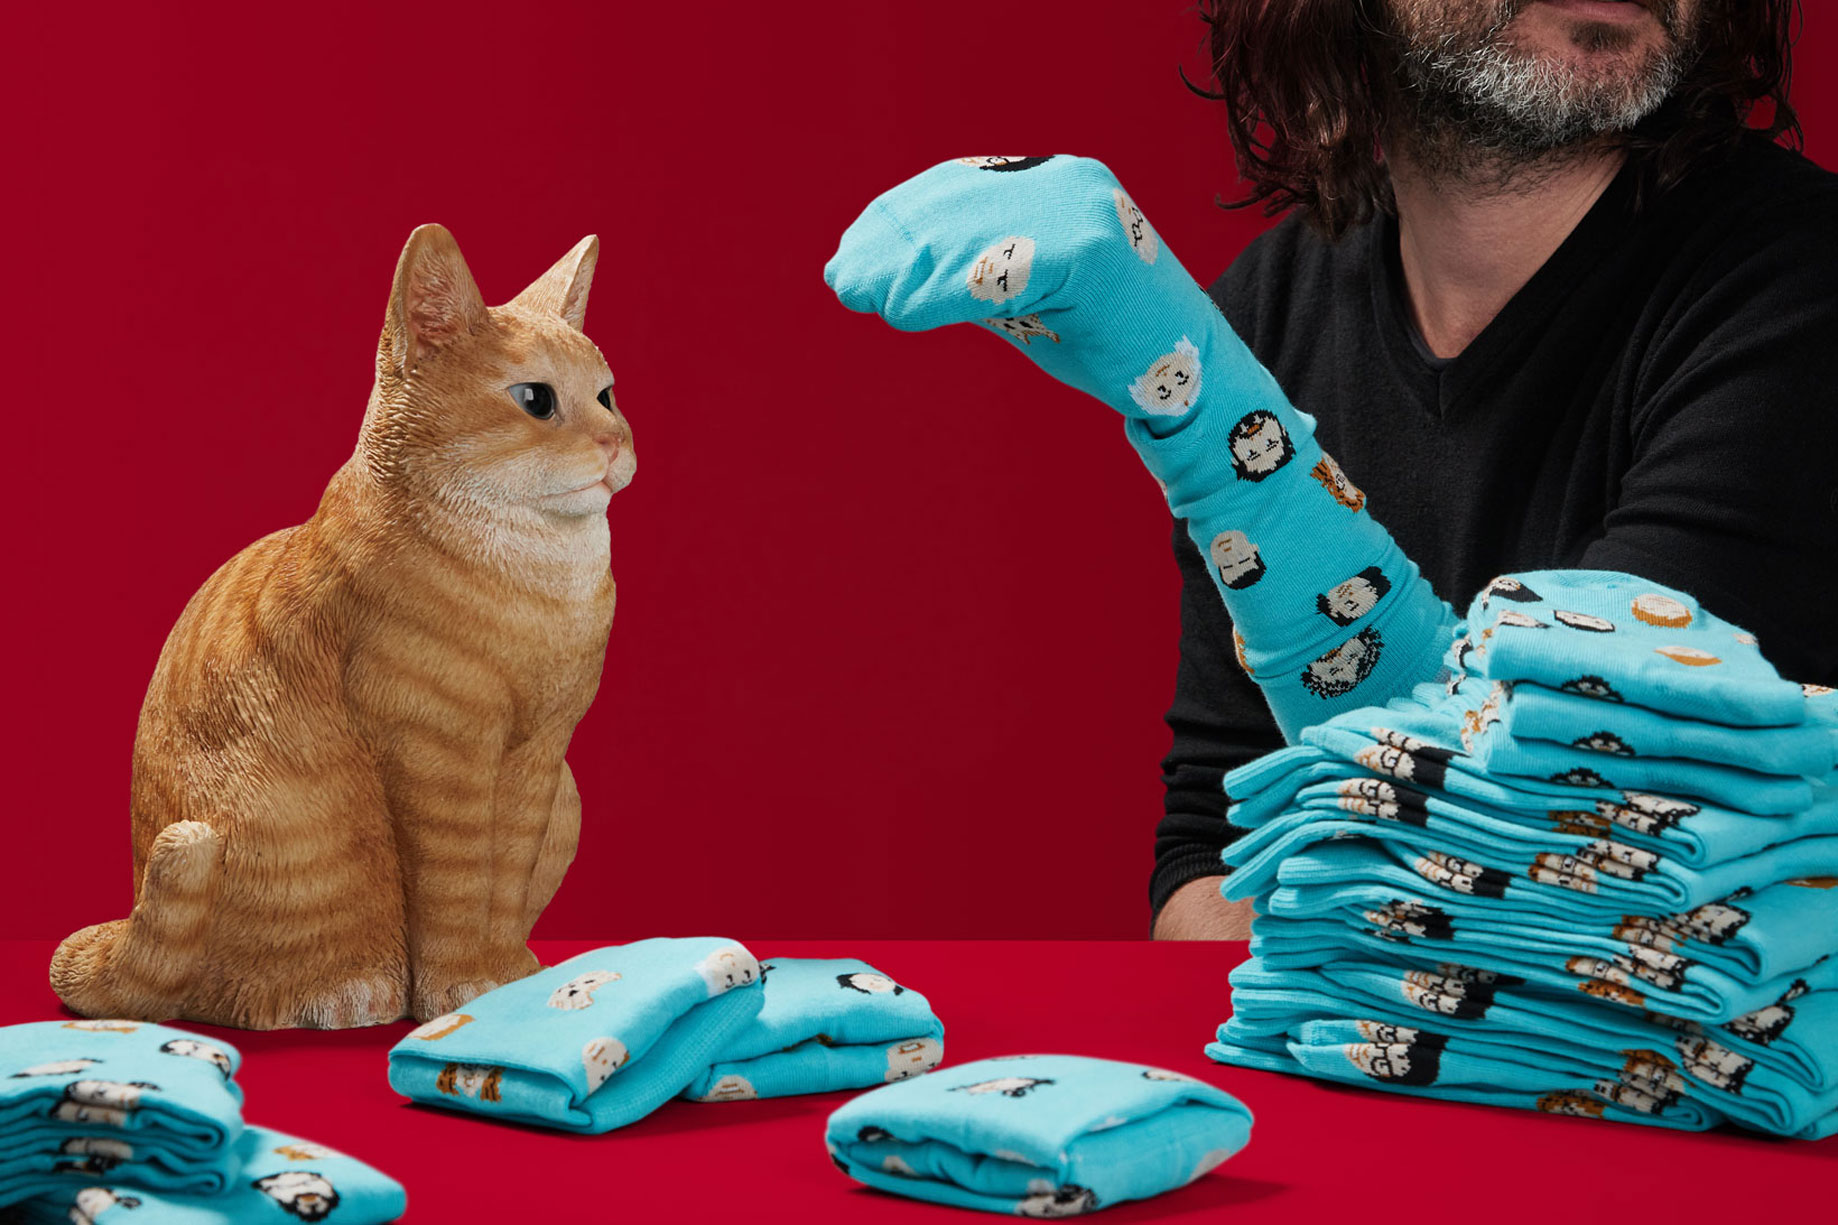 Space cat and snake sock by Vibranding's self-promotion campaign